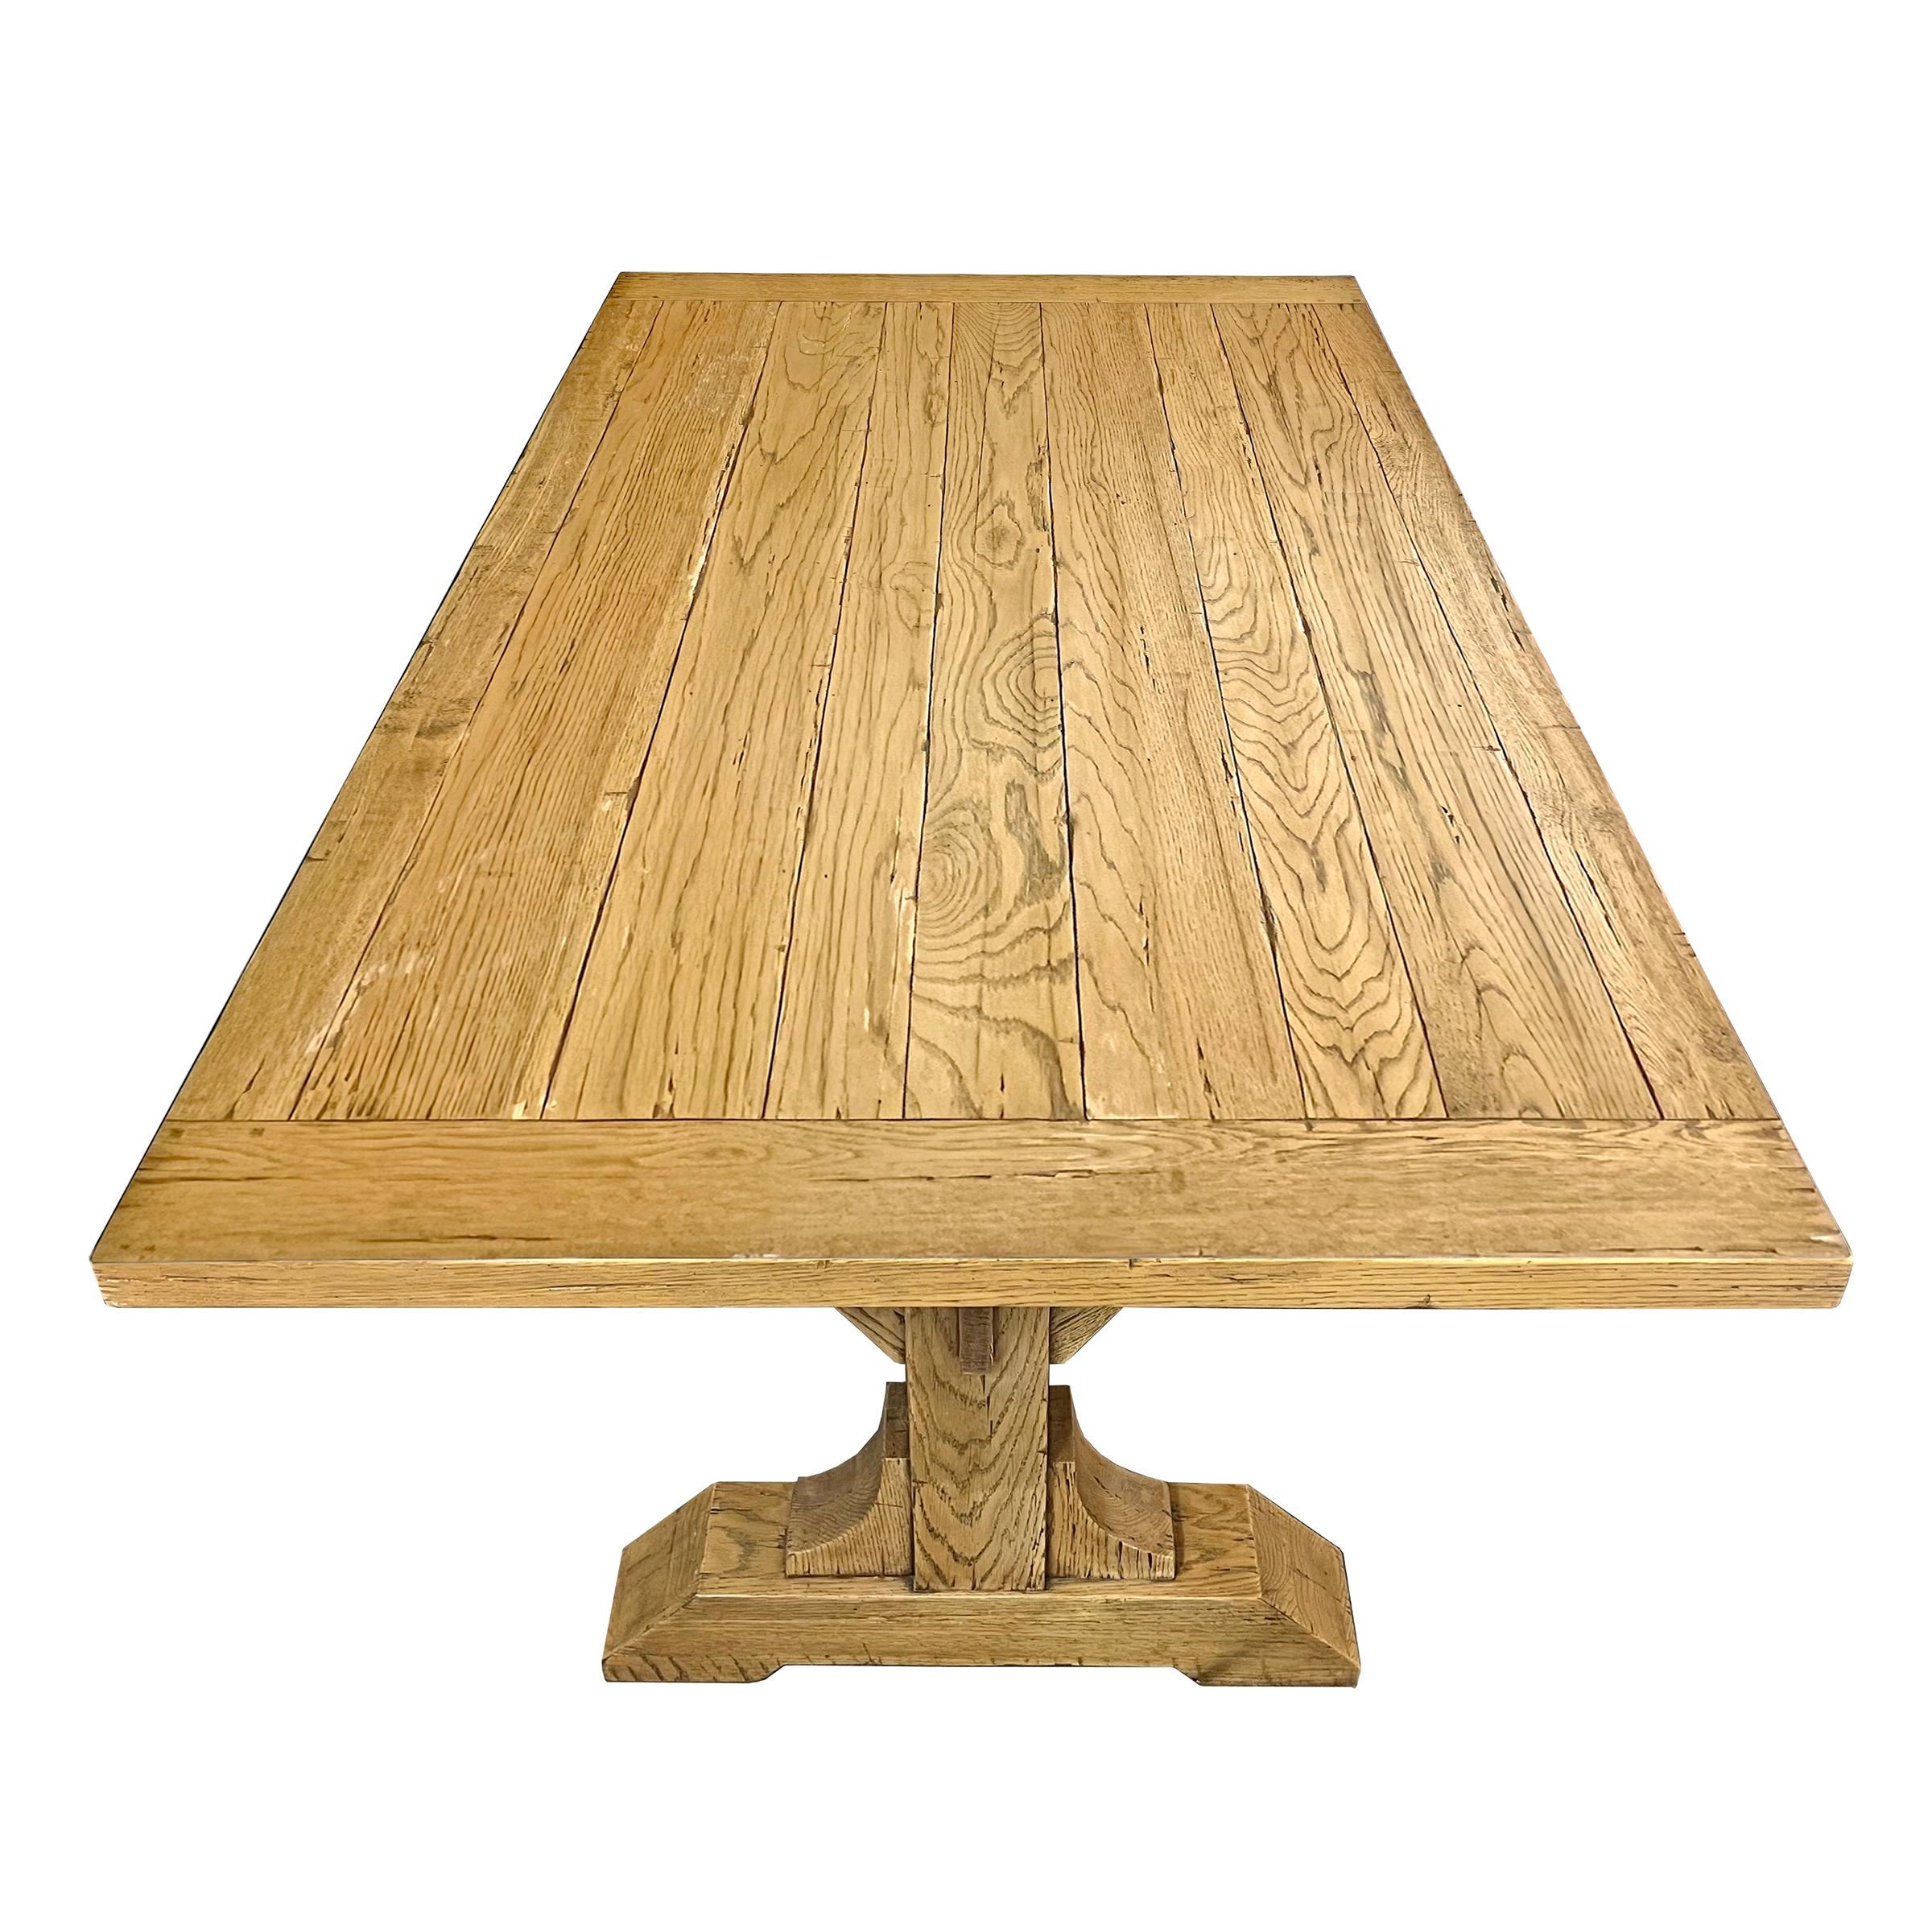 American Solid Oak Timber Frame Trestle Table For Sale